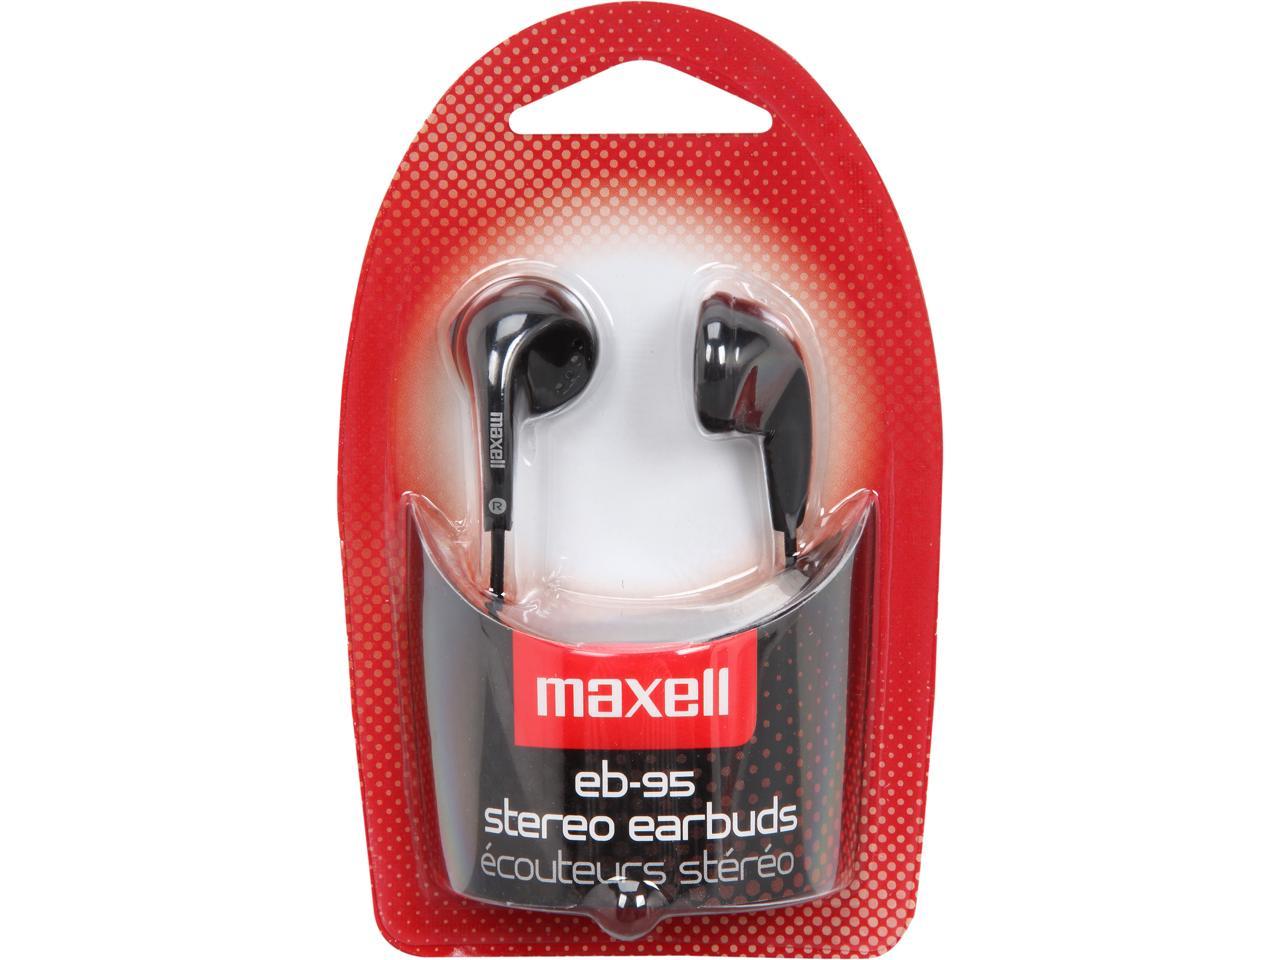 Maxell In-Ear Headphones, Black, MAX190560 - image 2 of 2